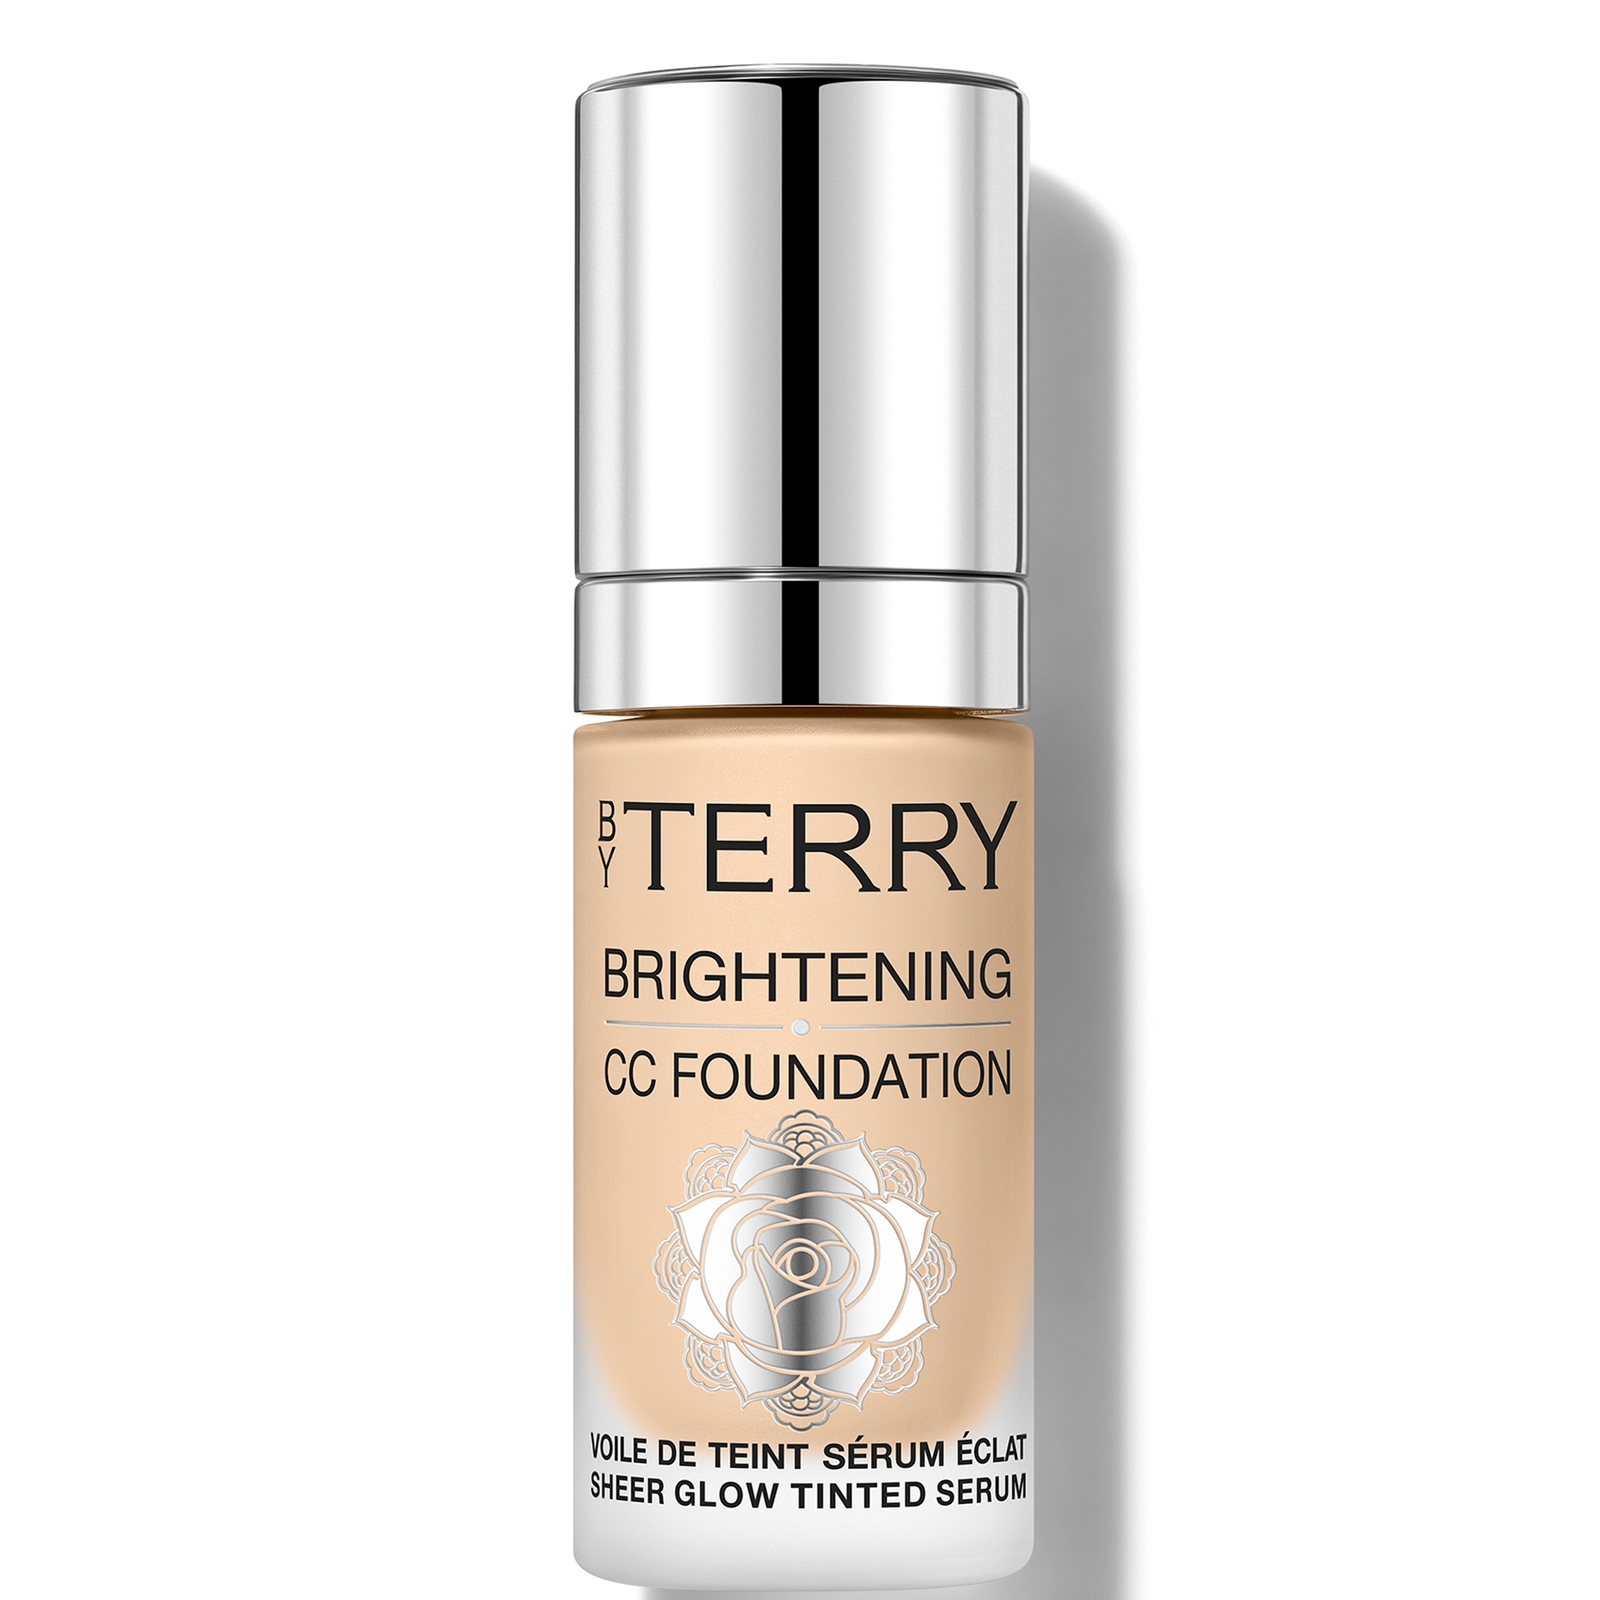 Image of By Terry Brightening CC Foundation 30ml (Various Shades) - 3N - MEDIUM LIGHT NEUTRAL